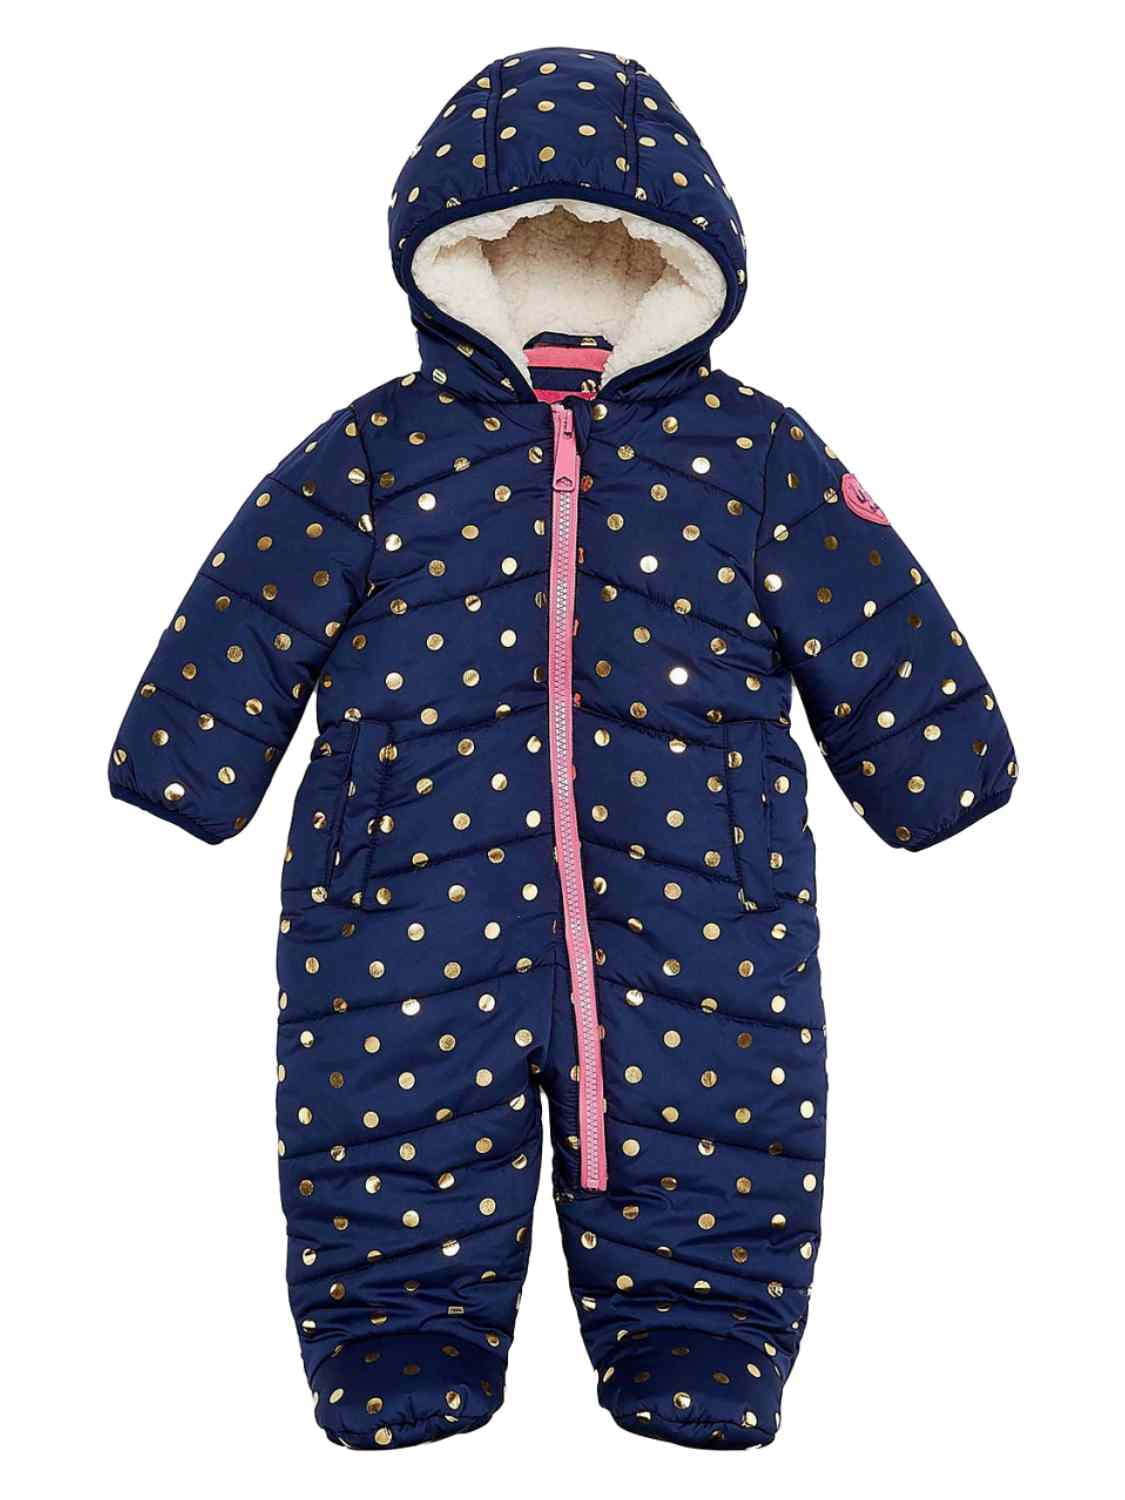 Infants and Toddler Girls Jessica Simpson Baby Girls 2-Piece Snowsuit with Snow Bib Pants and Puffer Jacket